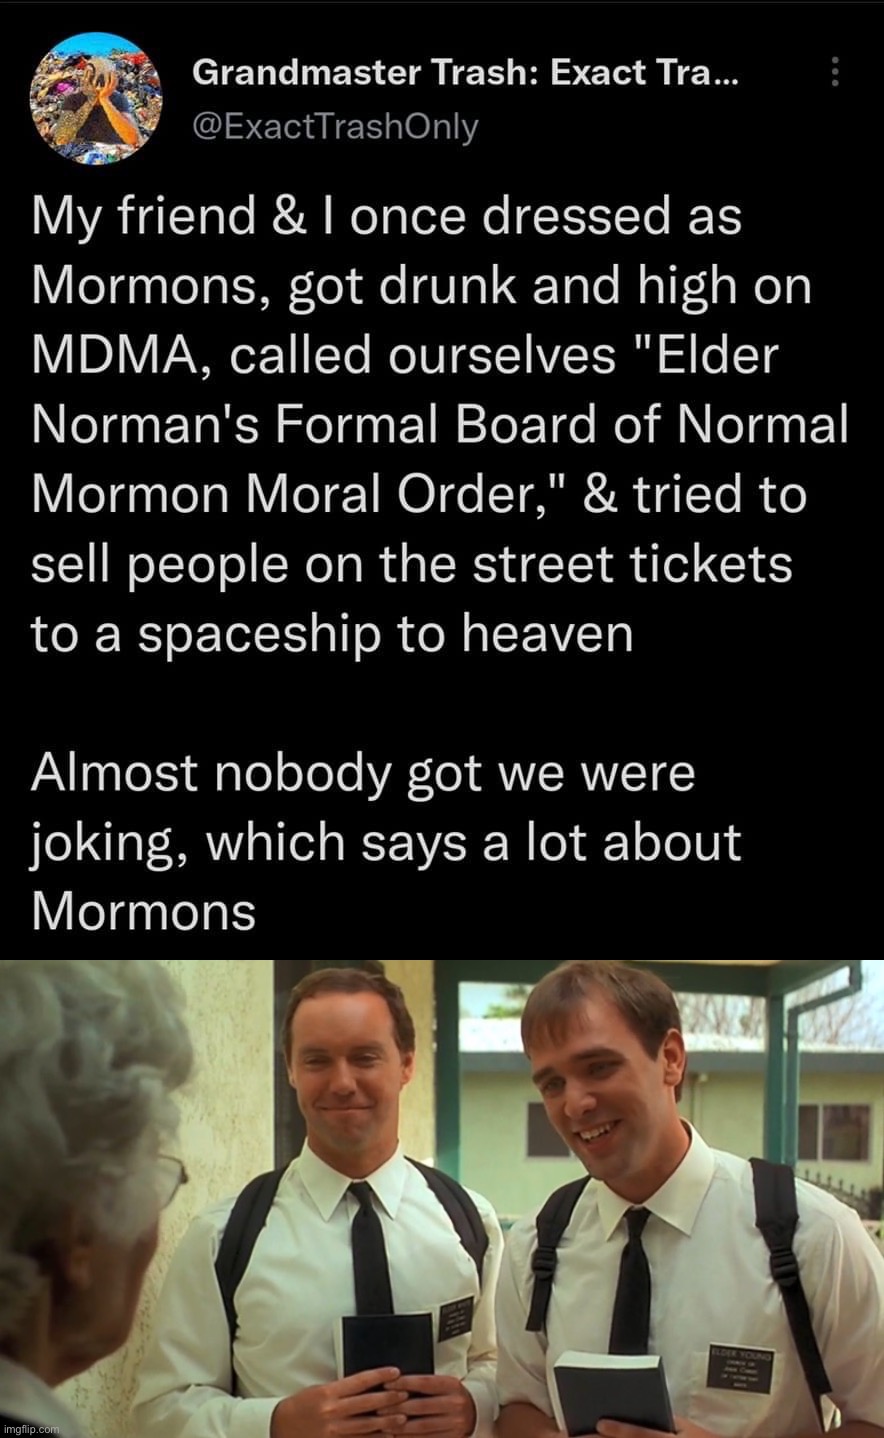 Mormonphobia, but not you BritishMormon you’re cool. Also: the real story is they did drugs | image tagged in mormonphobia,mormons visiting and recruiting,mornon,drugs are bad,don't do drugs,war on drugs | made w/ Imgflip meme maker